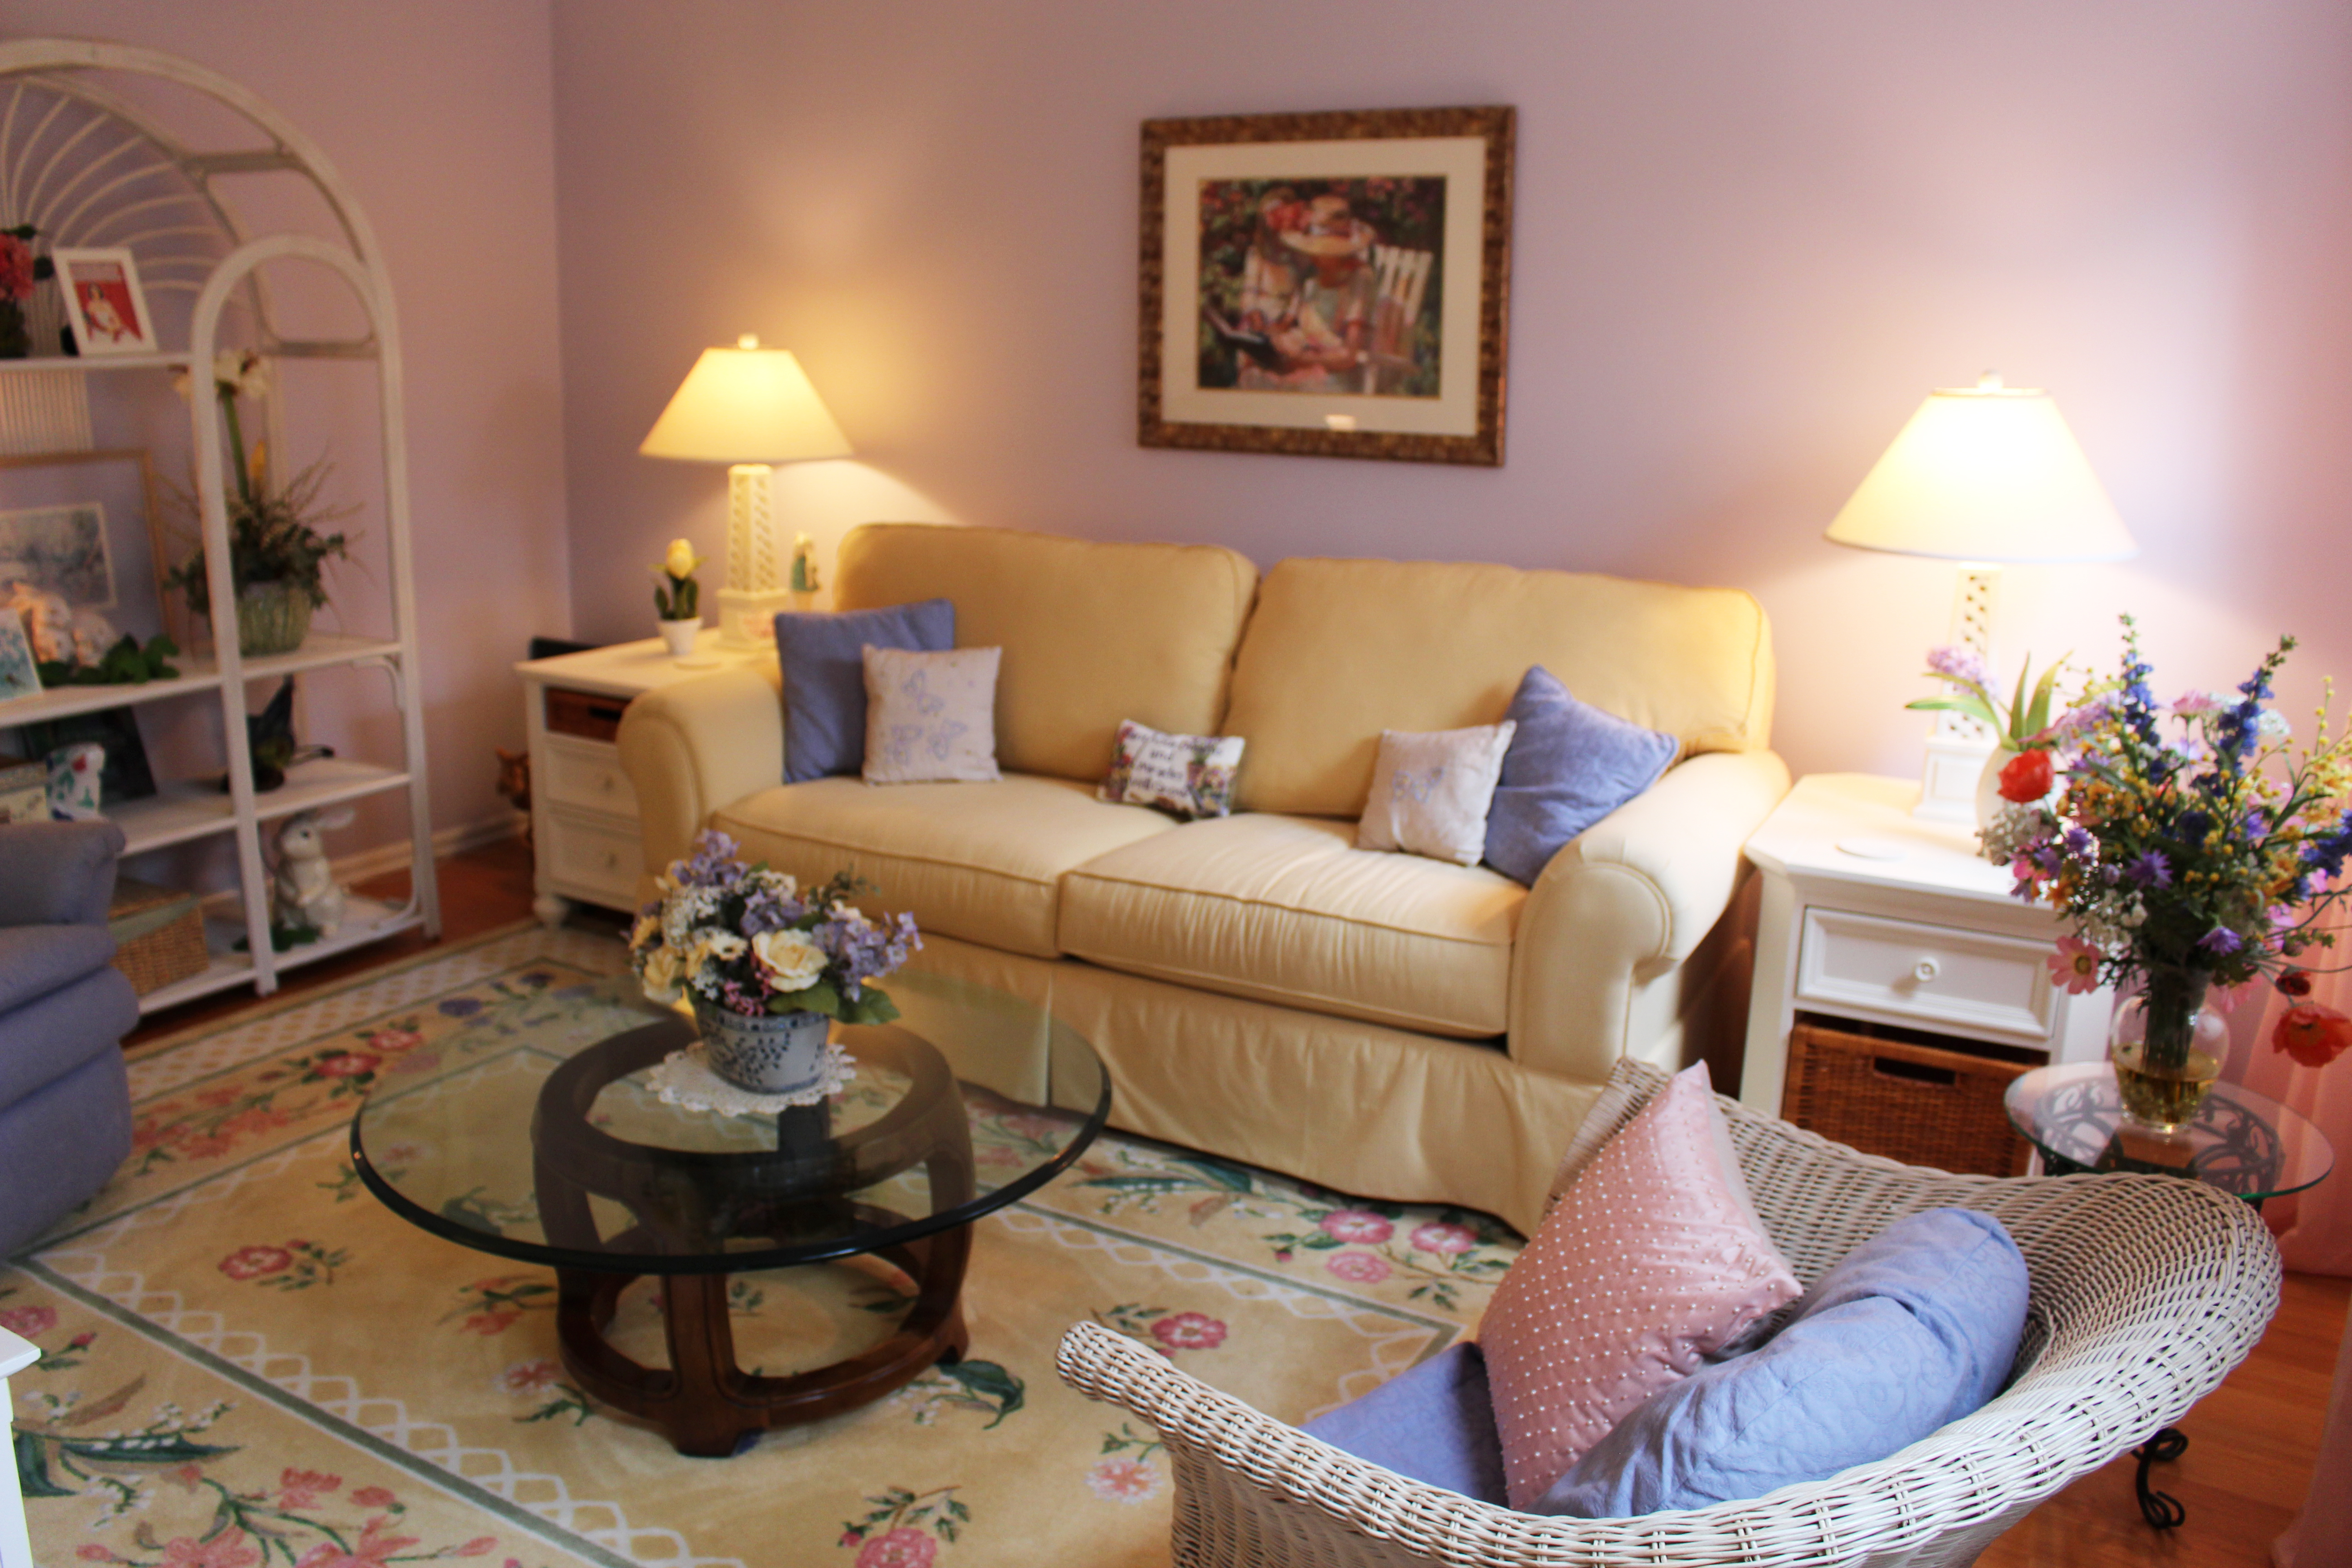 Living room is decorated in soft, soothing pastels.